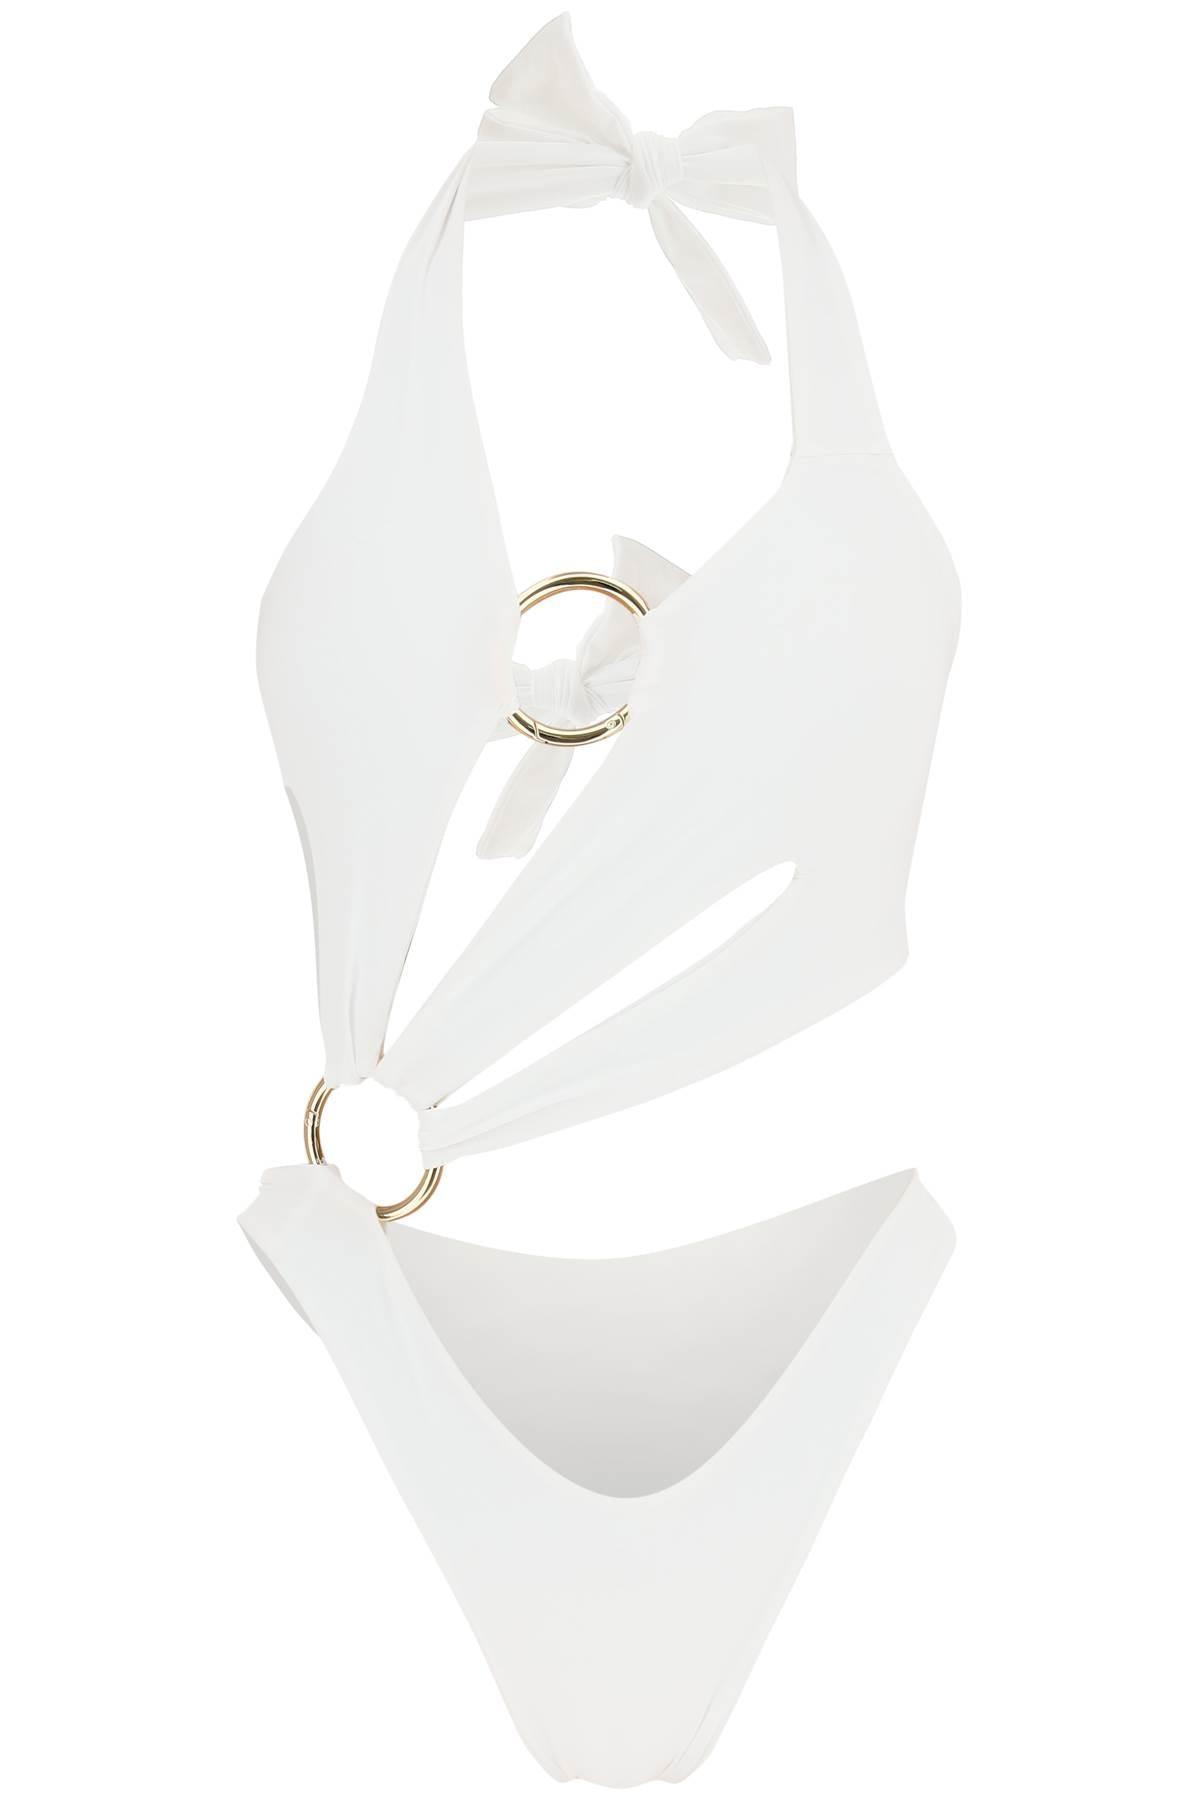 Louisa Ballou Sex Wax One Piece Swimsuit in White | Lyst